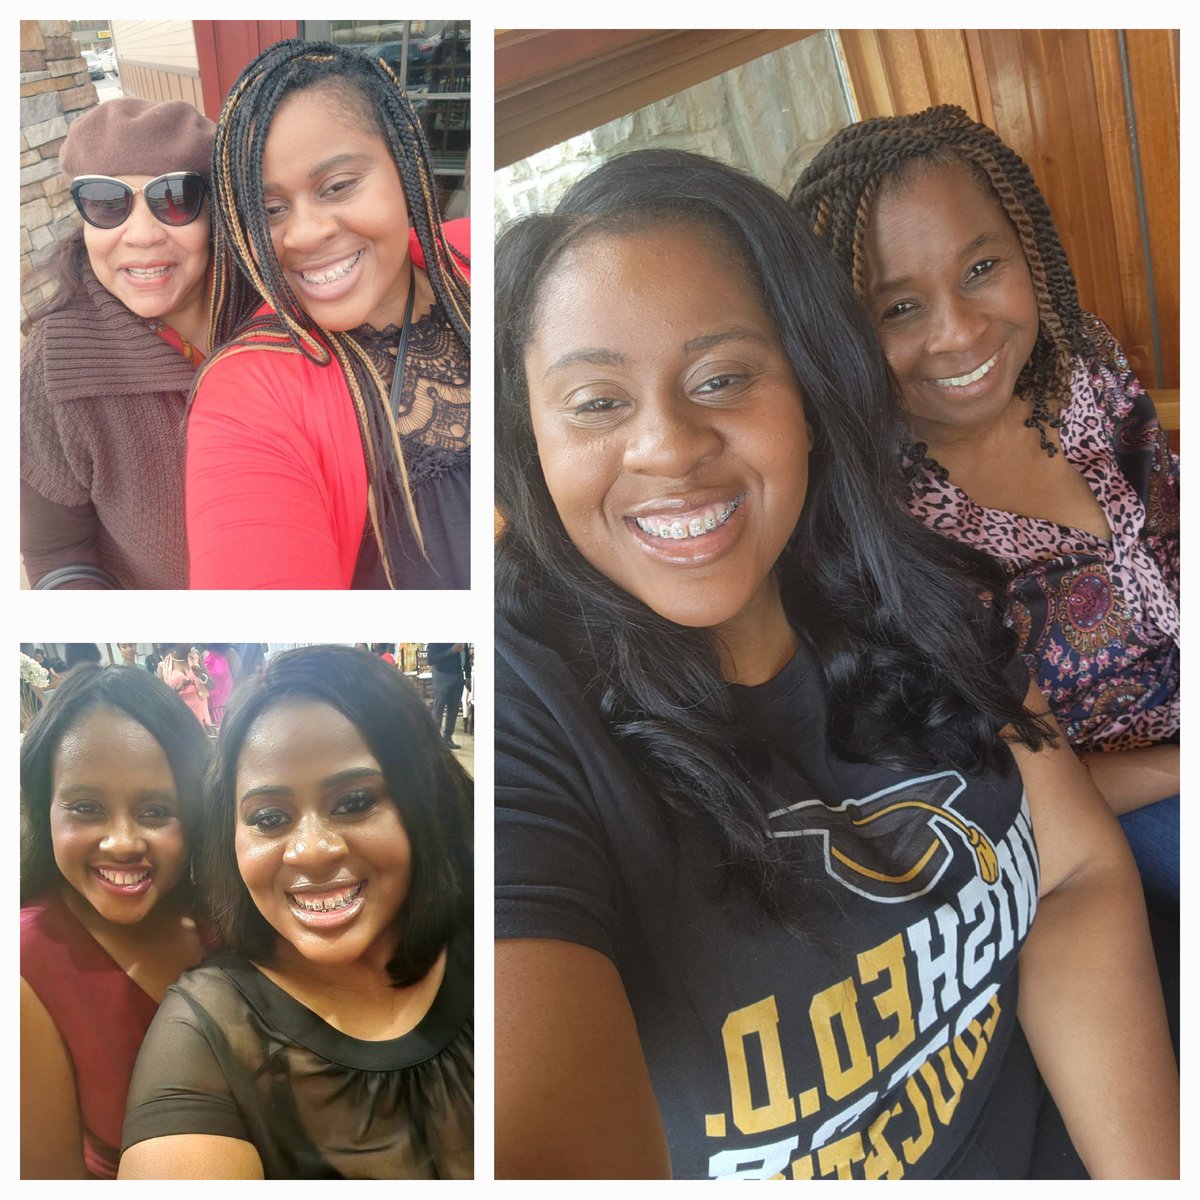 Happy Mother's Day to my grown people...my mom, my godmom and my auntie!! Sooooo grateful for a dynamic village. They keep me grounded and guide me as often as needed. They don't play about me and I love them so much!! 💕 @yourkindagirl @tanzy_kilcrease